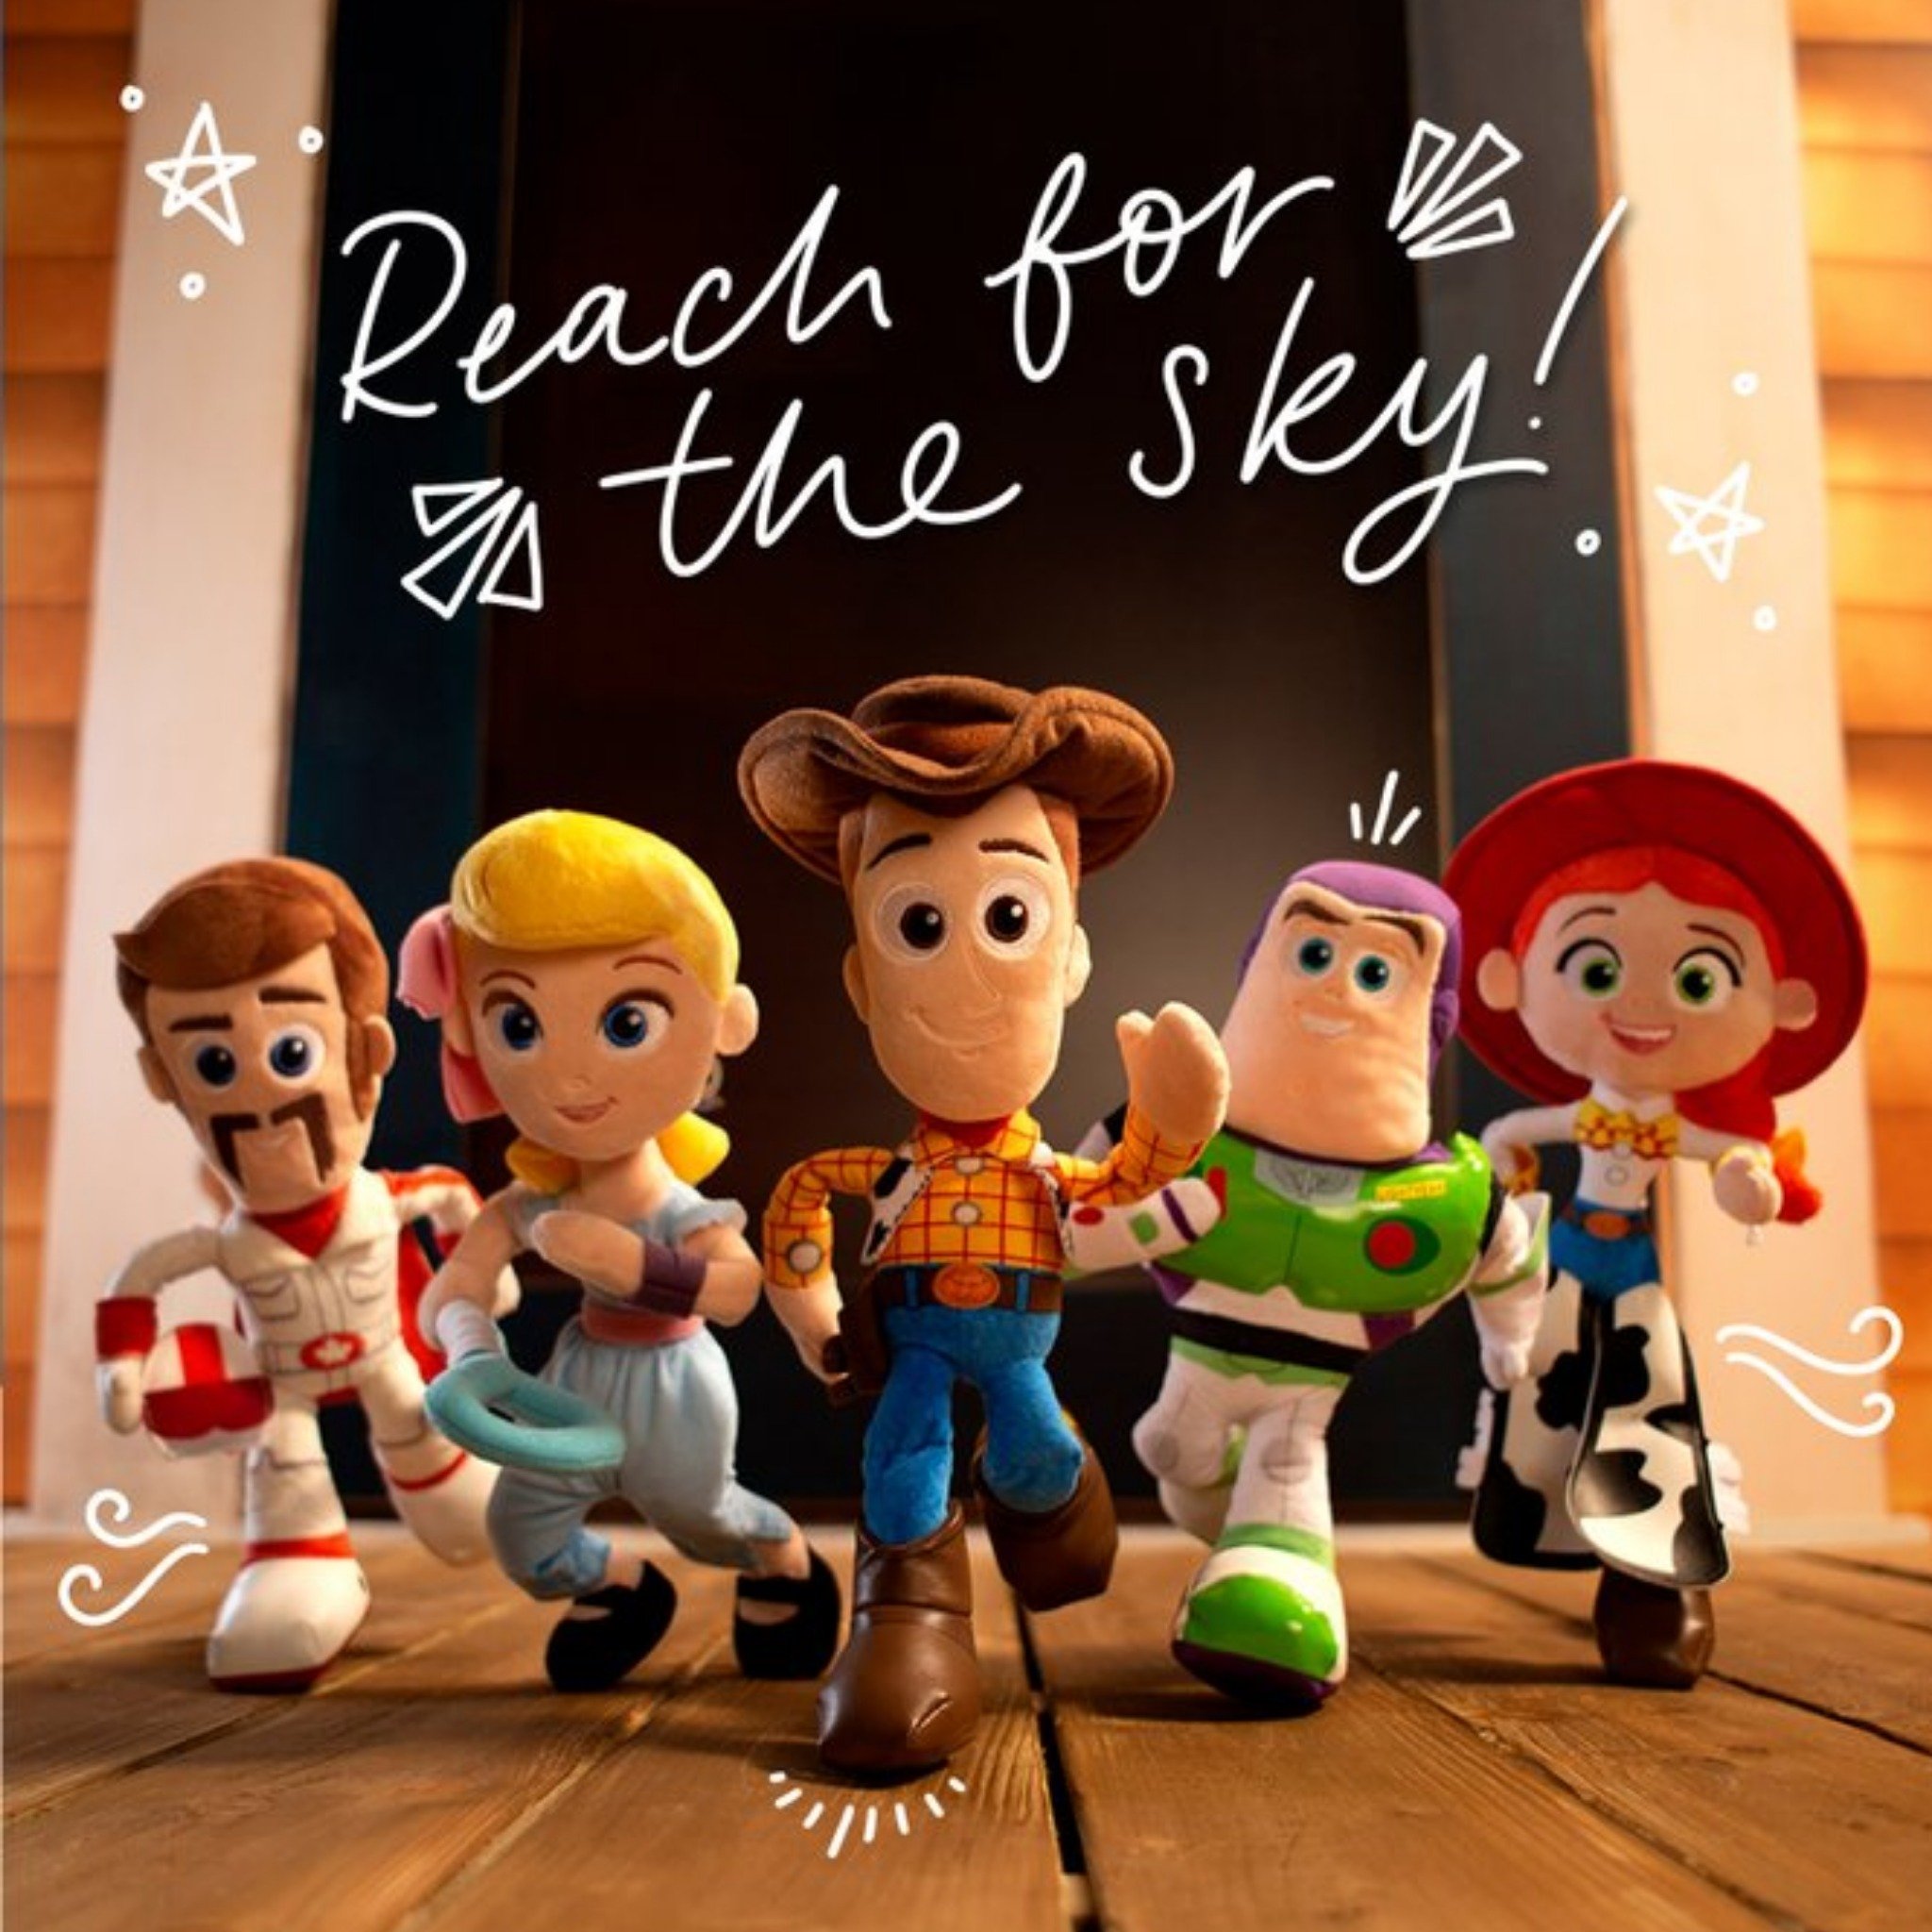 Cute Disney Plush Toy Story Reach For The Sky Congratulations Card, Large